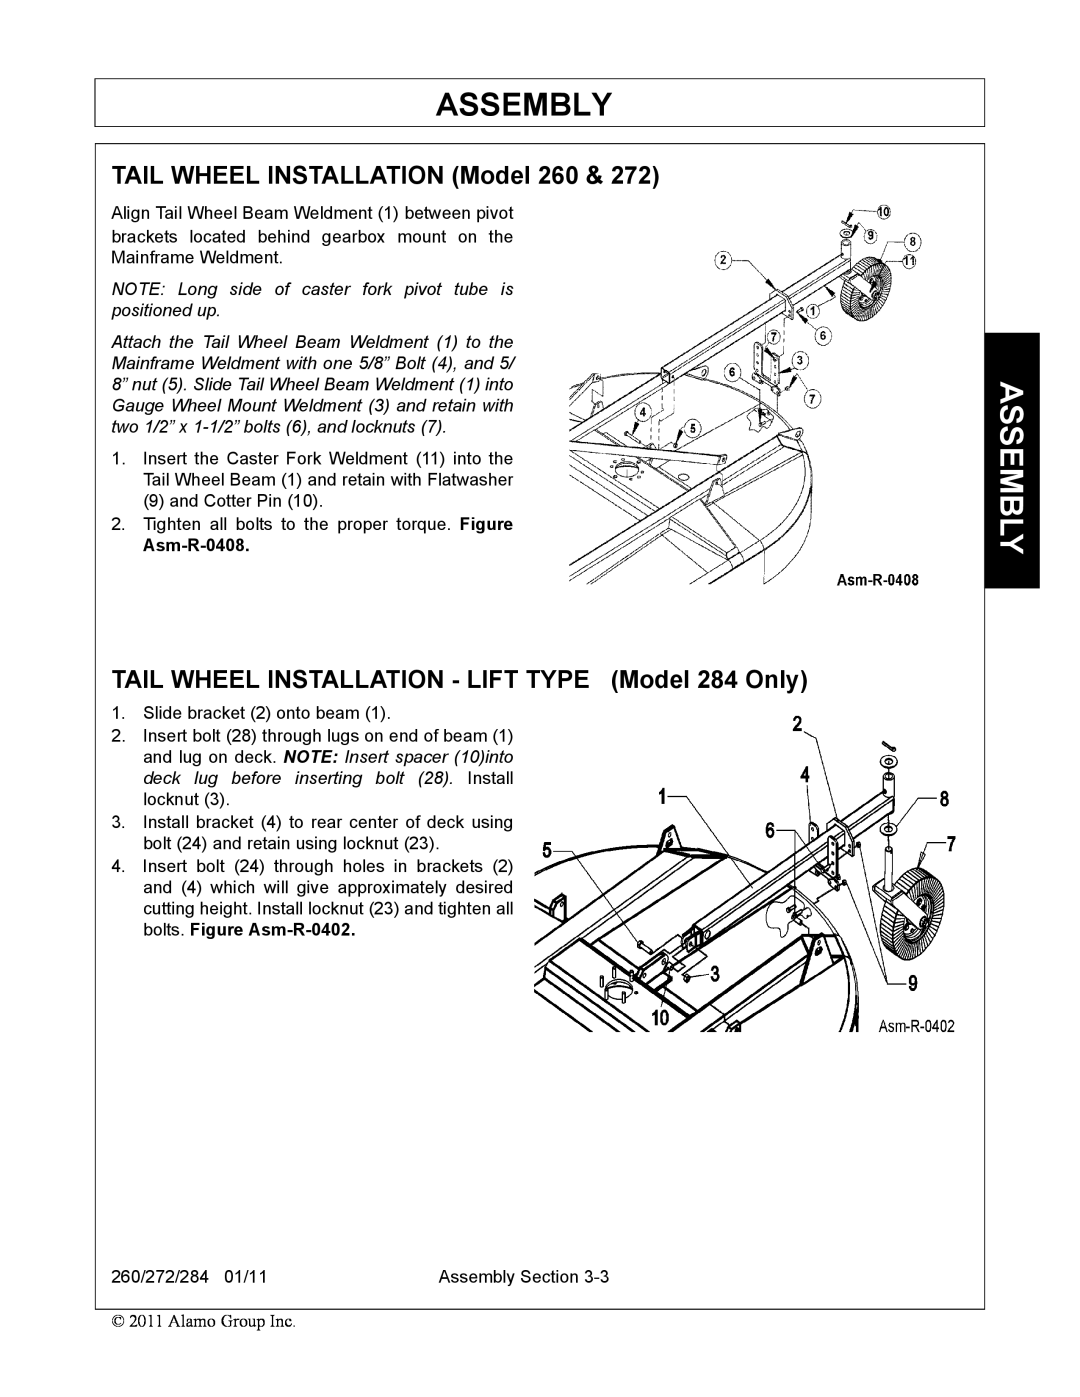 Alamo 272 TAIL WHEEL INSTALLATION Model 260, TAIL WHEEL INSTALLATION - LIFT TYPE Model 284 Only, Assembly, Asm-R-0408 